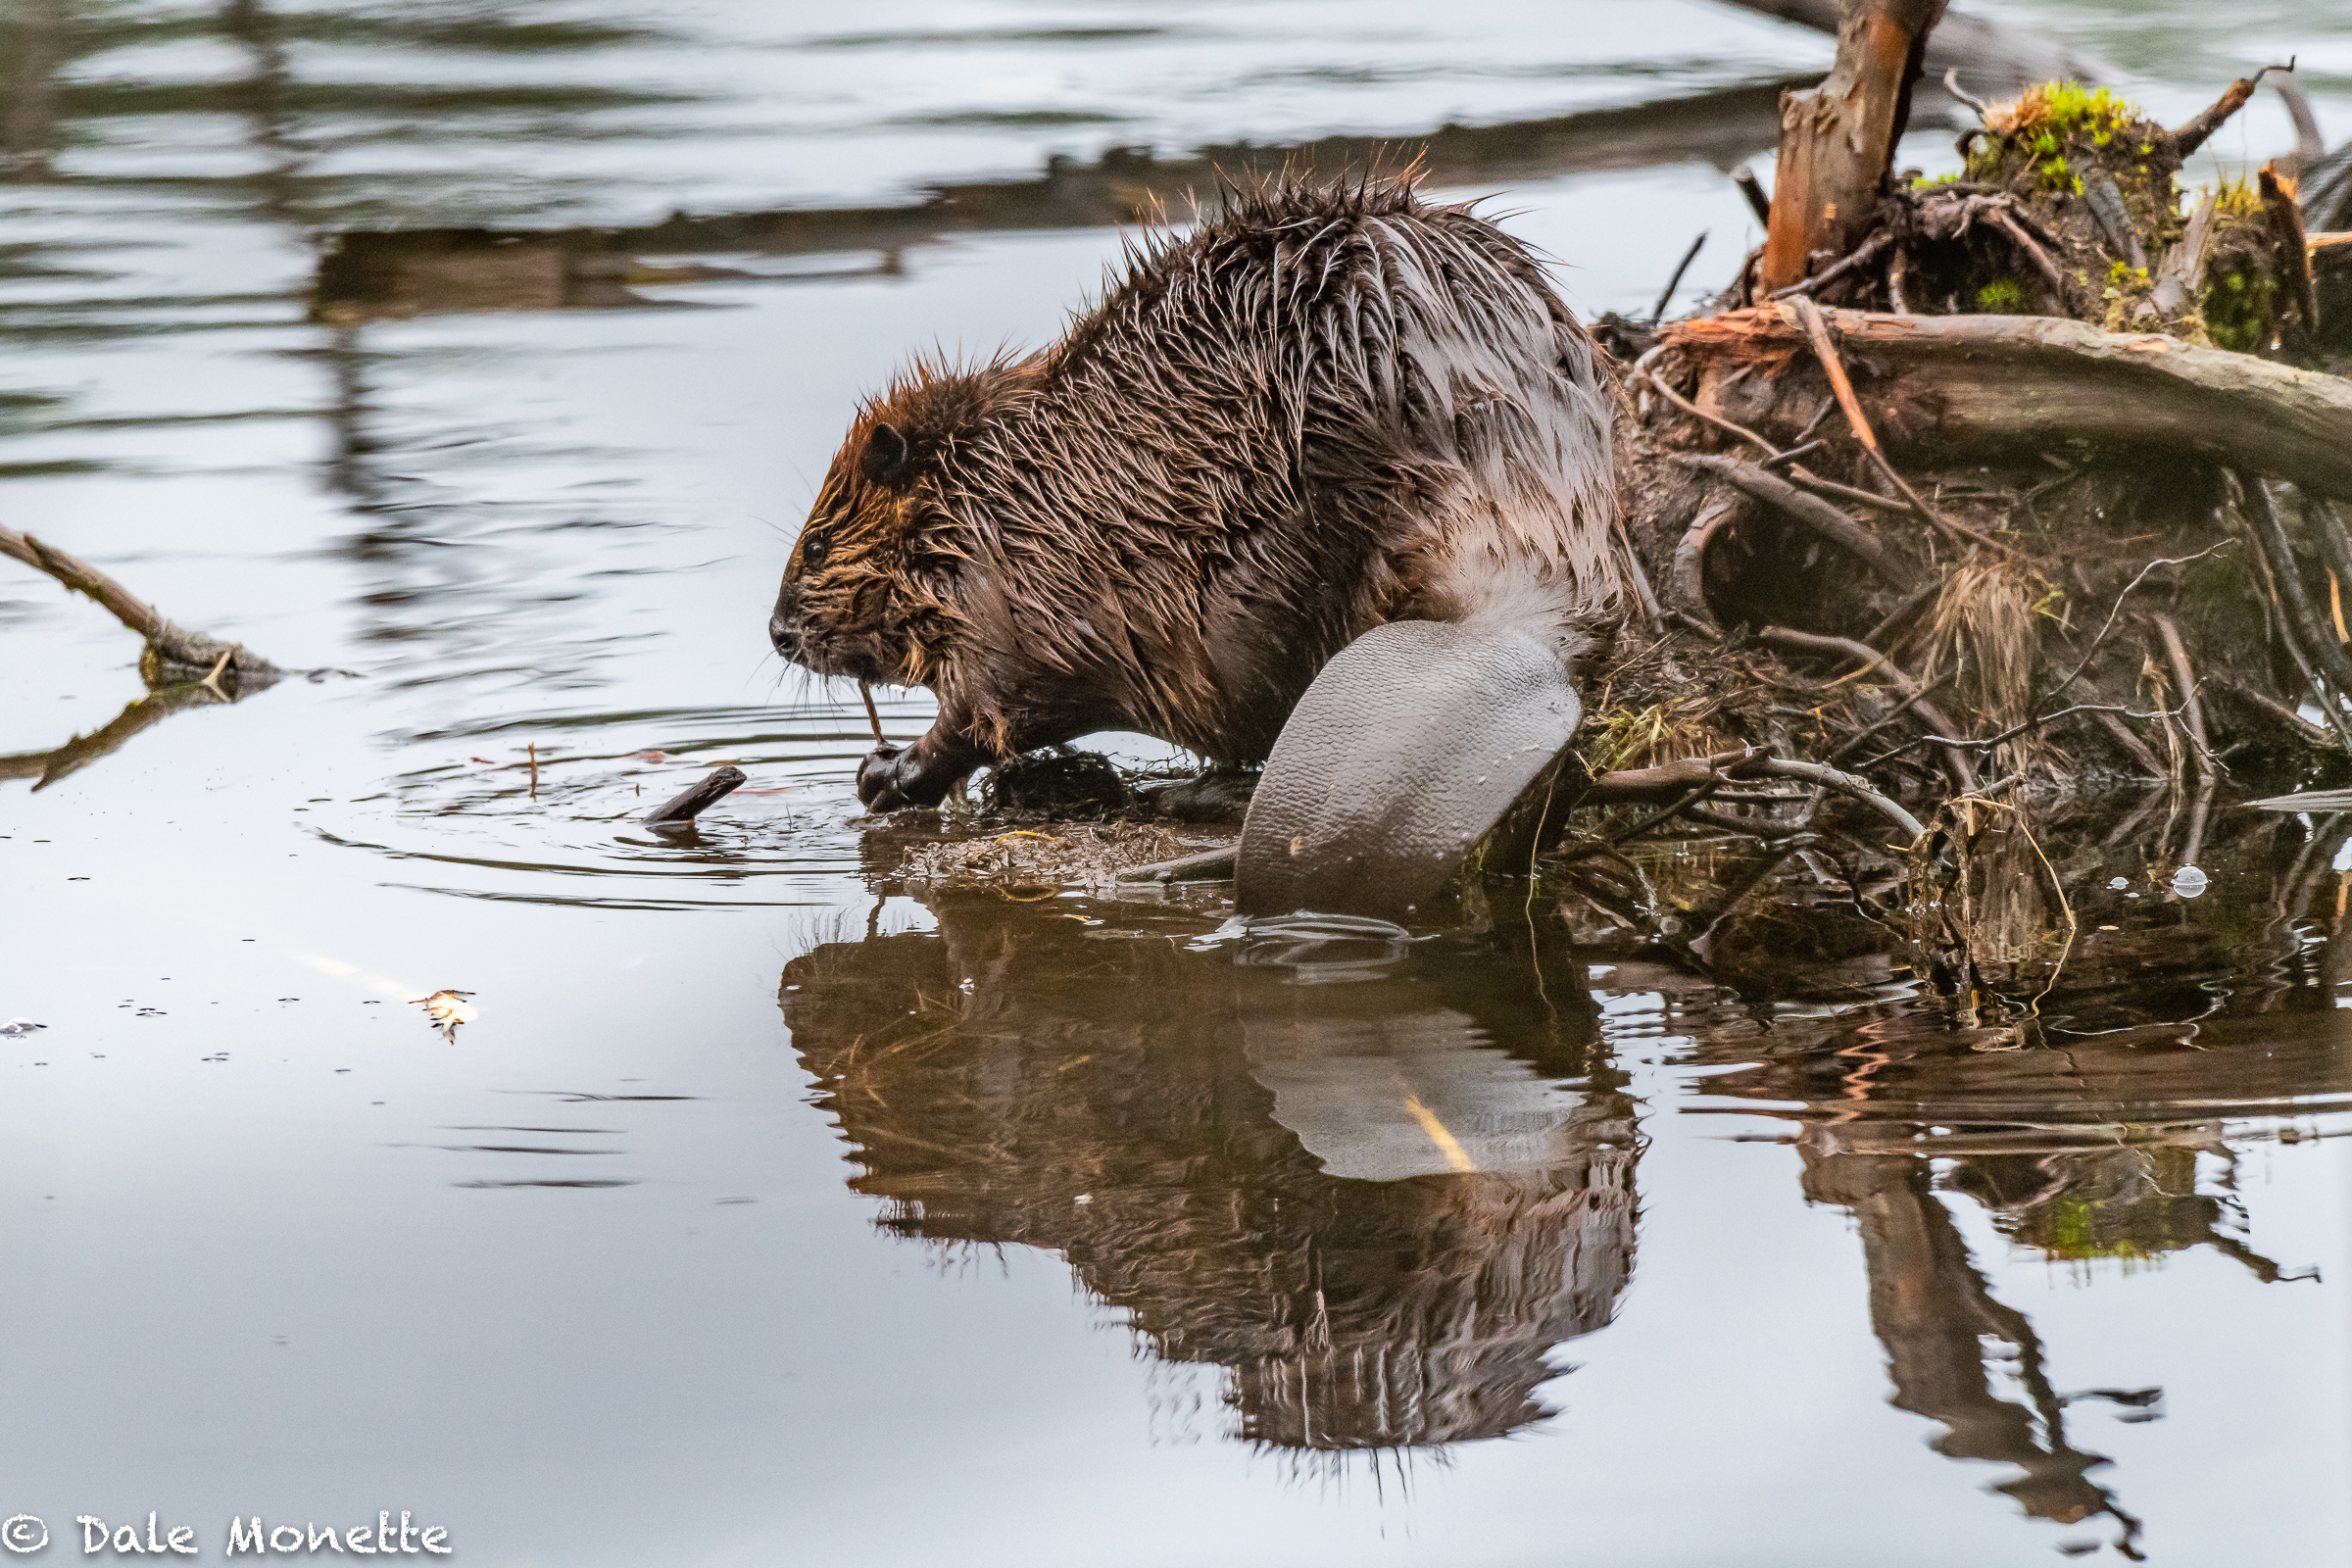   For some reason beavers are liking this spot to stop and feed for a few minutes. Here is a great shot of what a beaver tail looks like if you’ve never seen one close.  